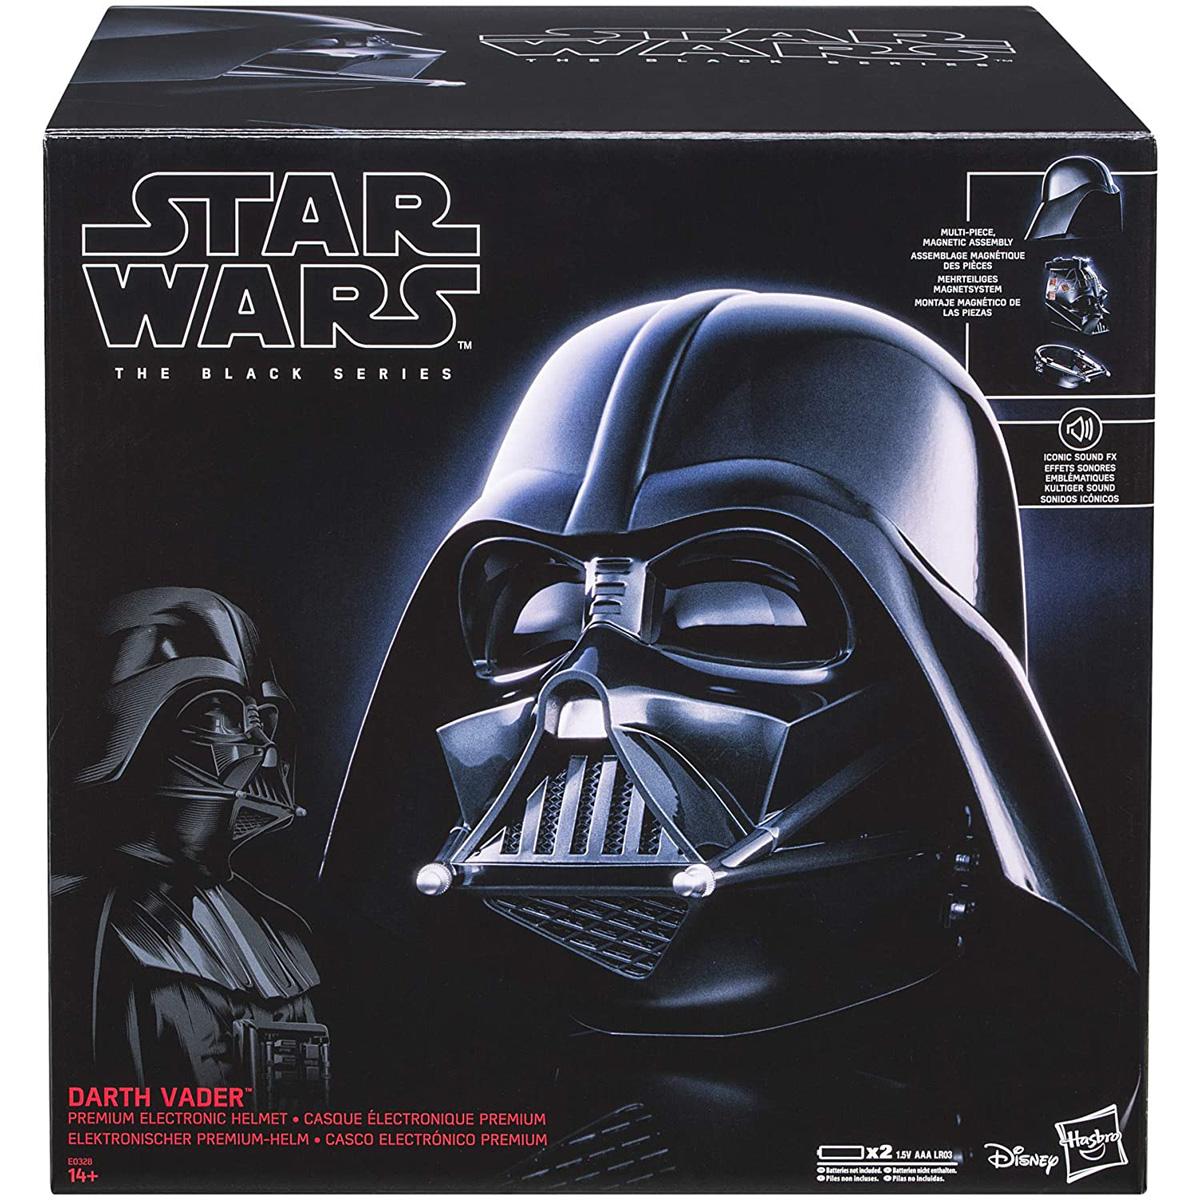 Star Wars The Black Series Darth Vader Electronic Helmet for $104.99 Shipped